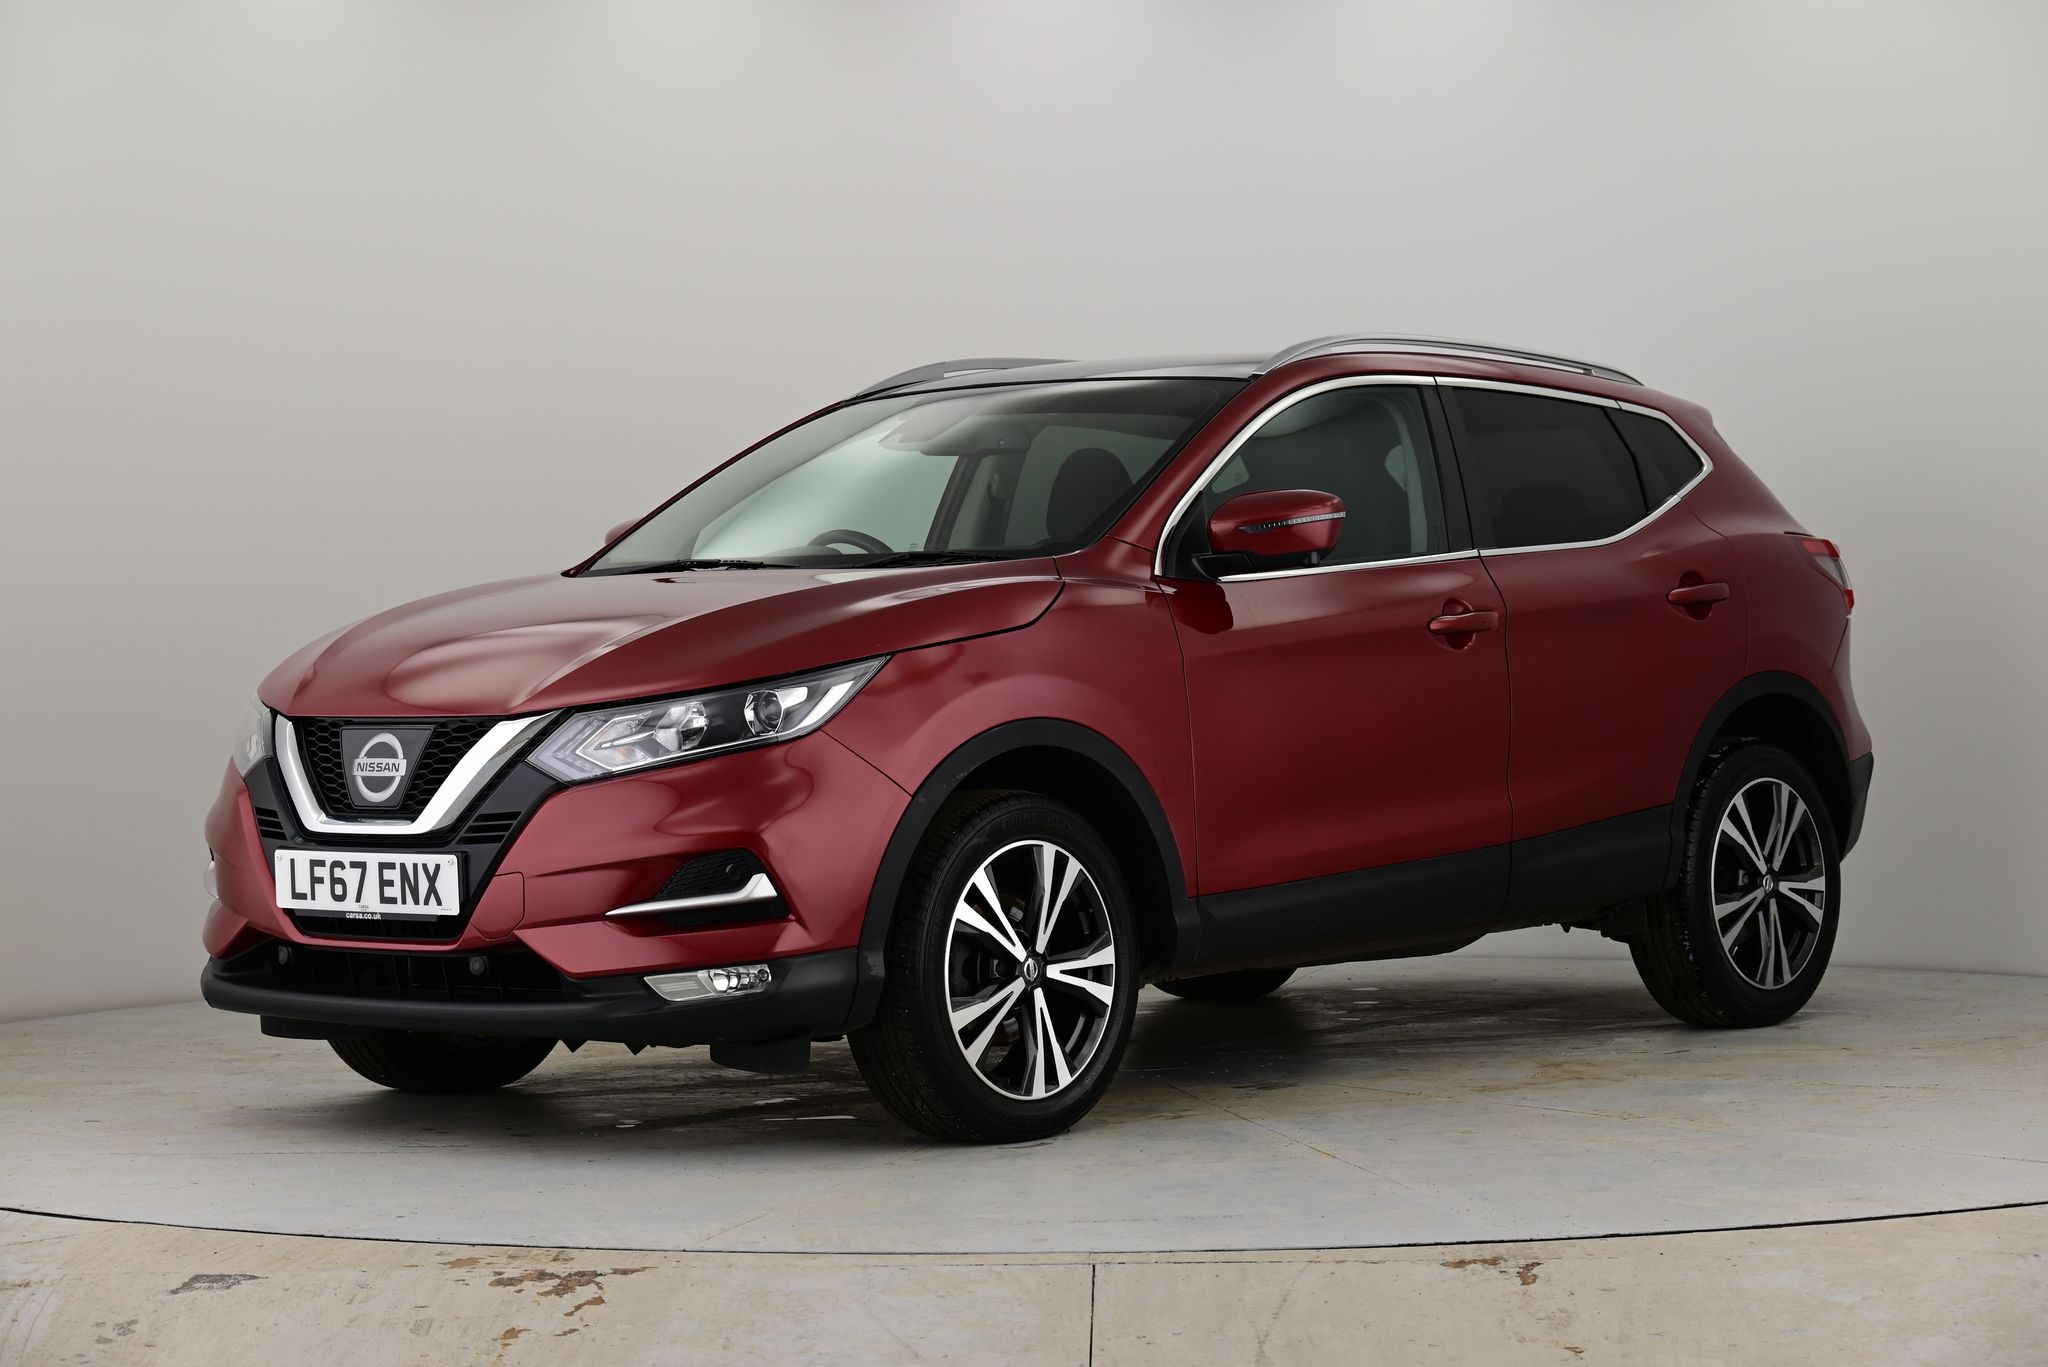 2017 used Nissan Qashqai 1.2 DIG-T N-Connecta (115 ps)